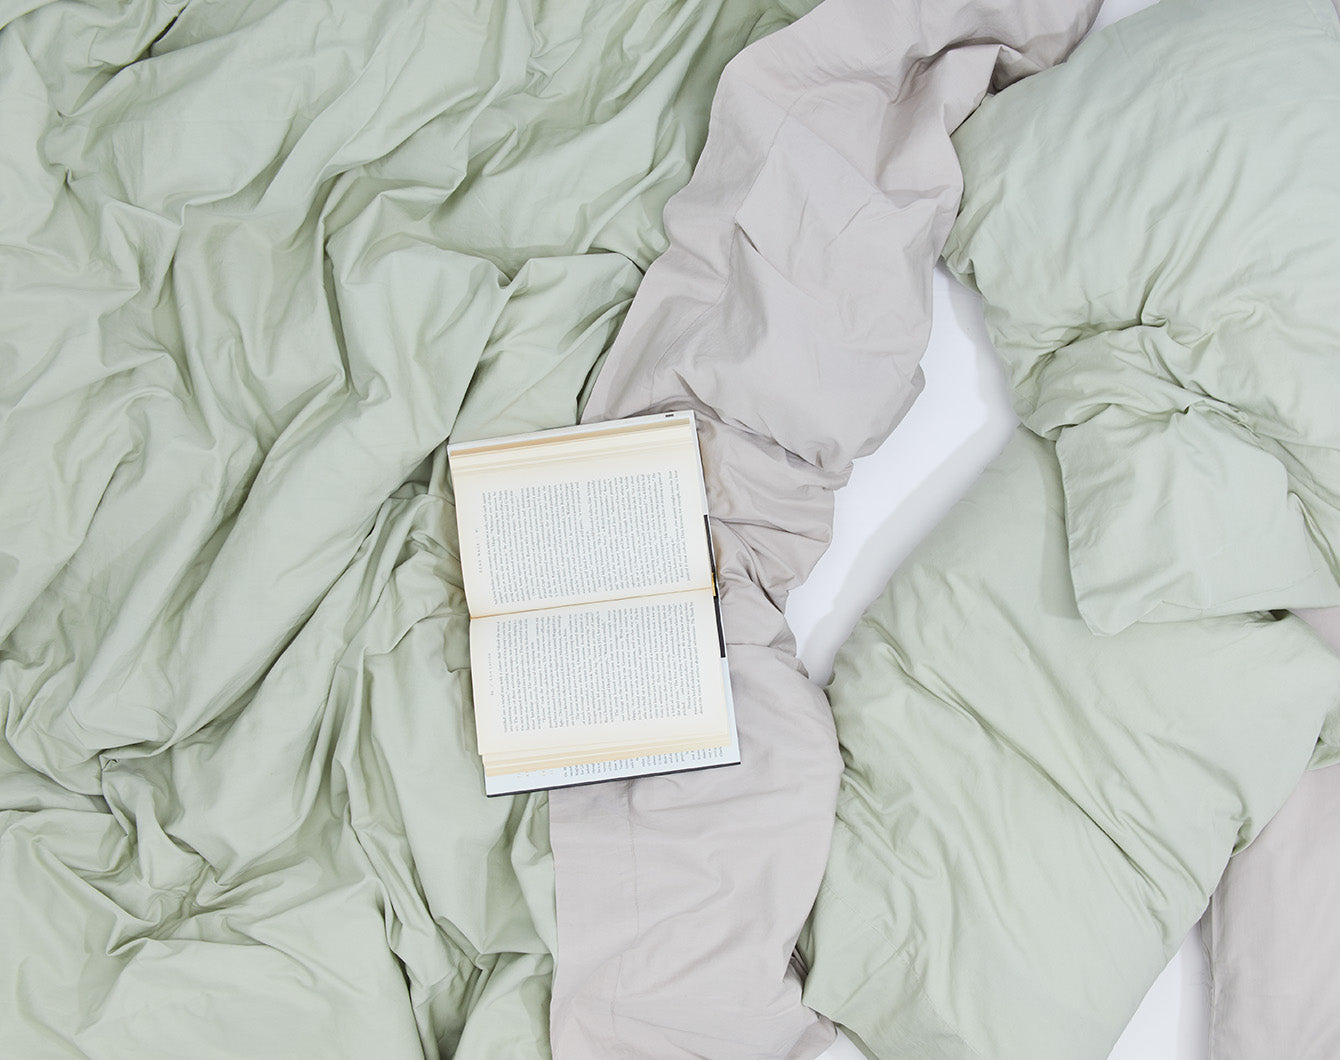 Green, grey and white bedding layers. Styled with an open book.